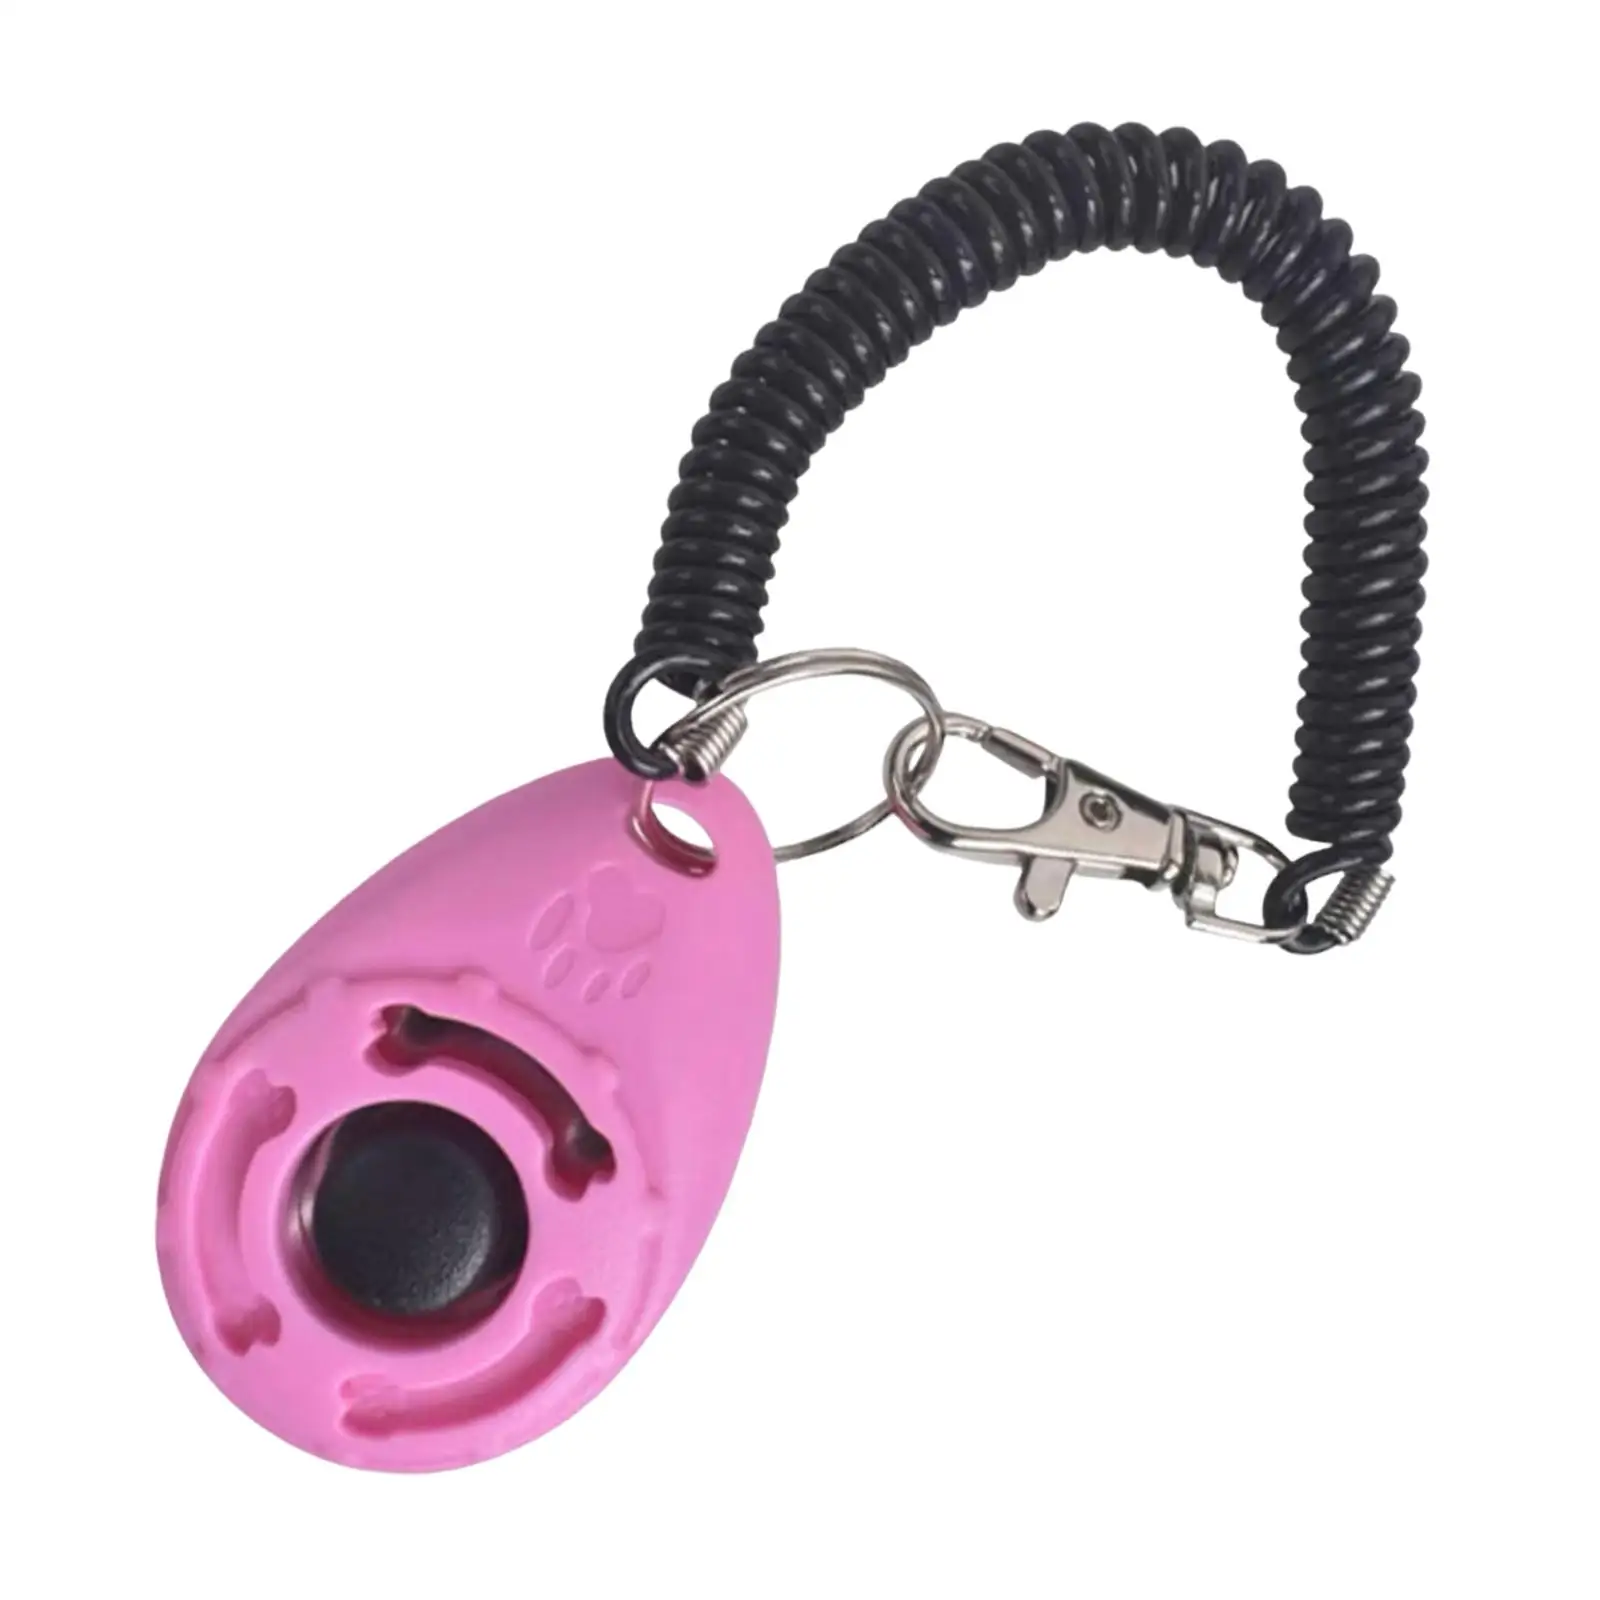 Dog Training Click with Wrist Strap Easy to Use for Household Pet Supplies